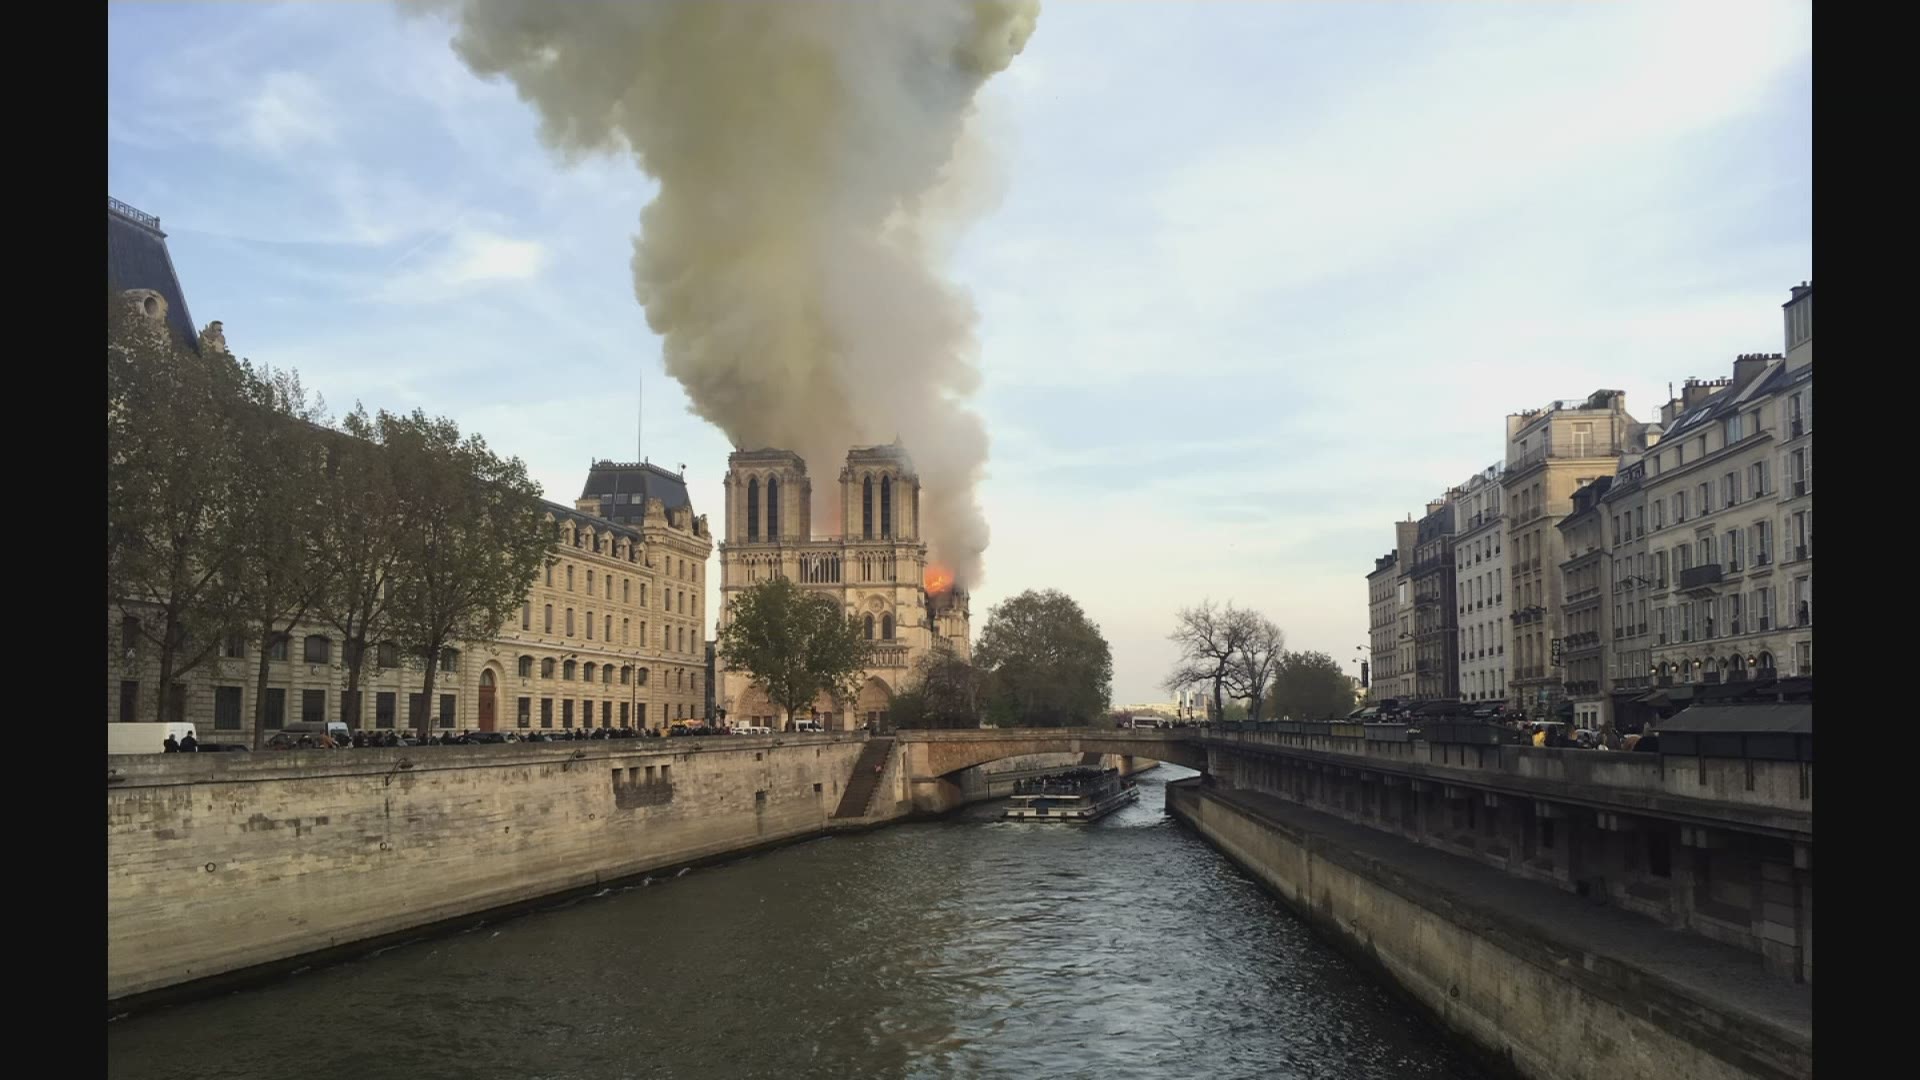 AP images from the fire at Notre Dame Cathedral in Paris, France.